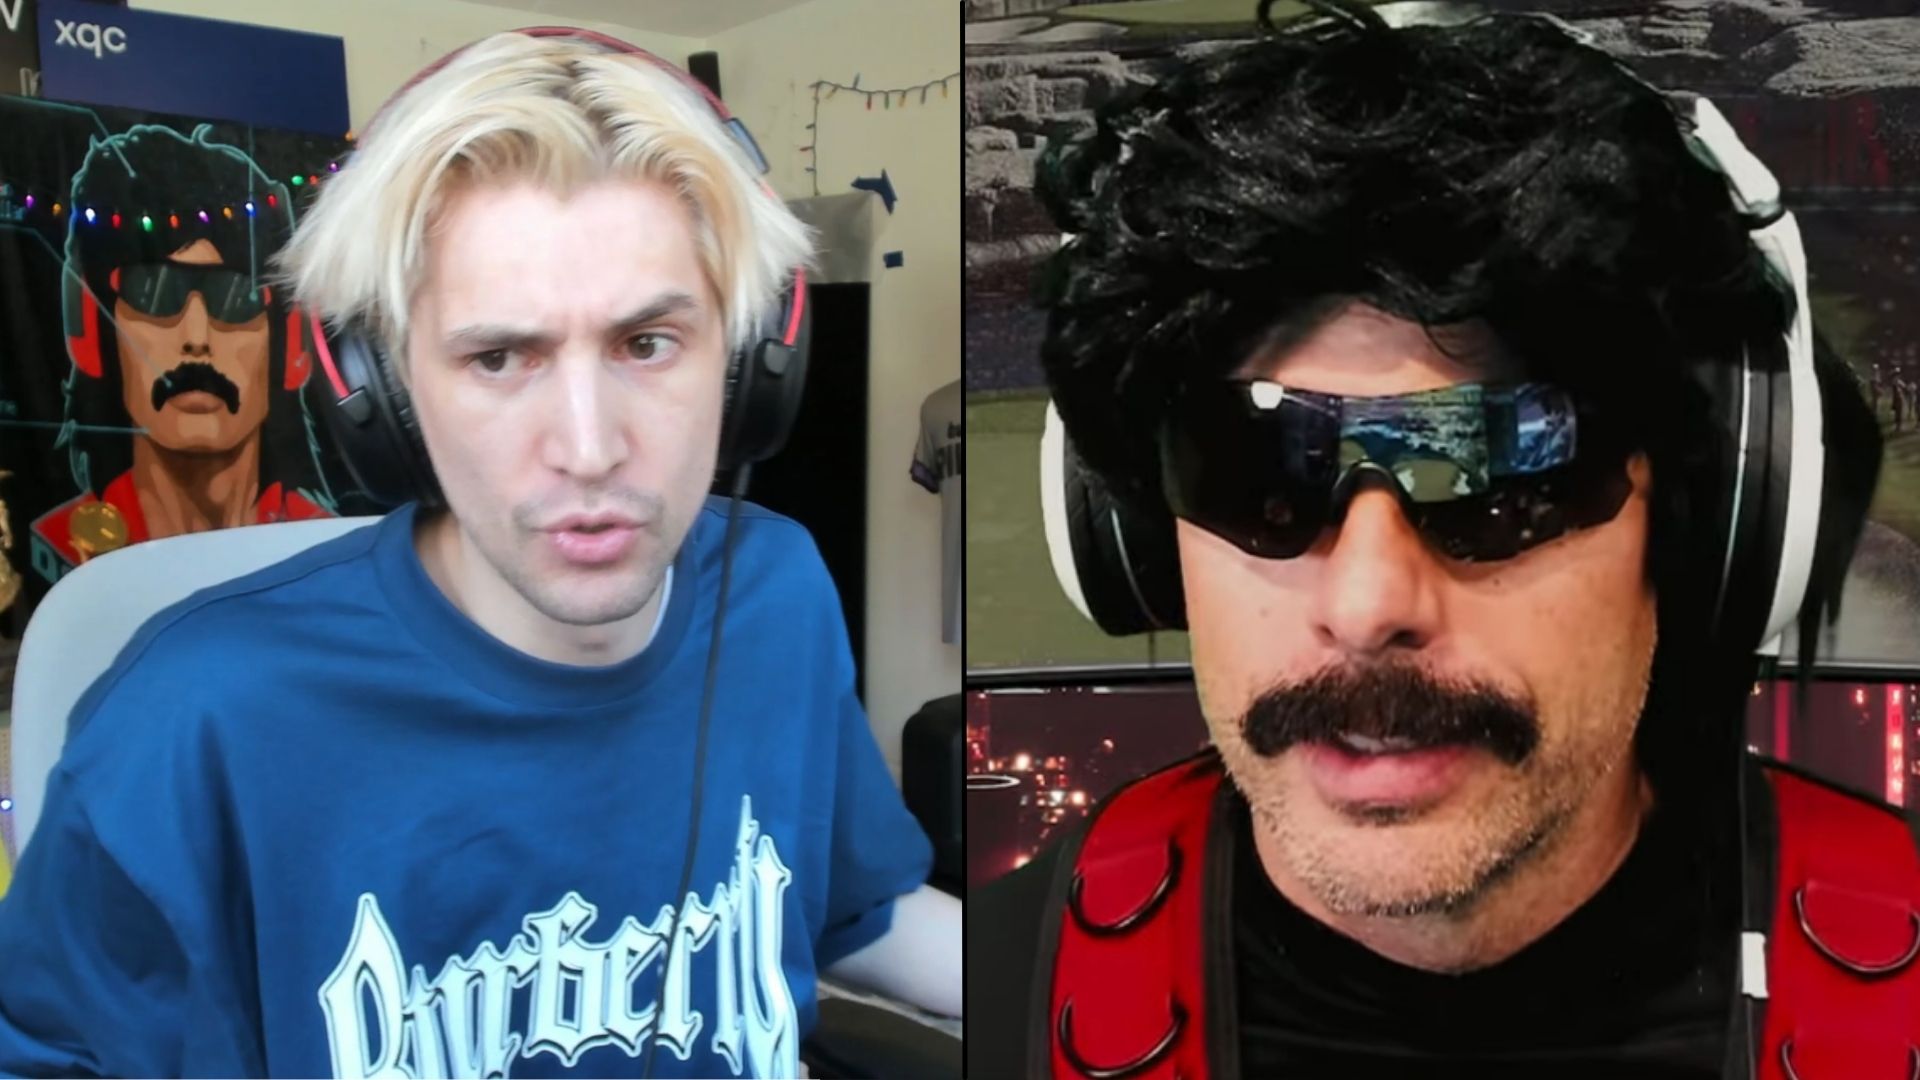 xQc responds to Dr Disrespect’s offer to meet at Lakers vs Warriors NBA